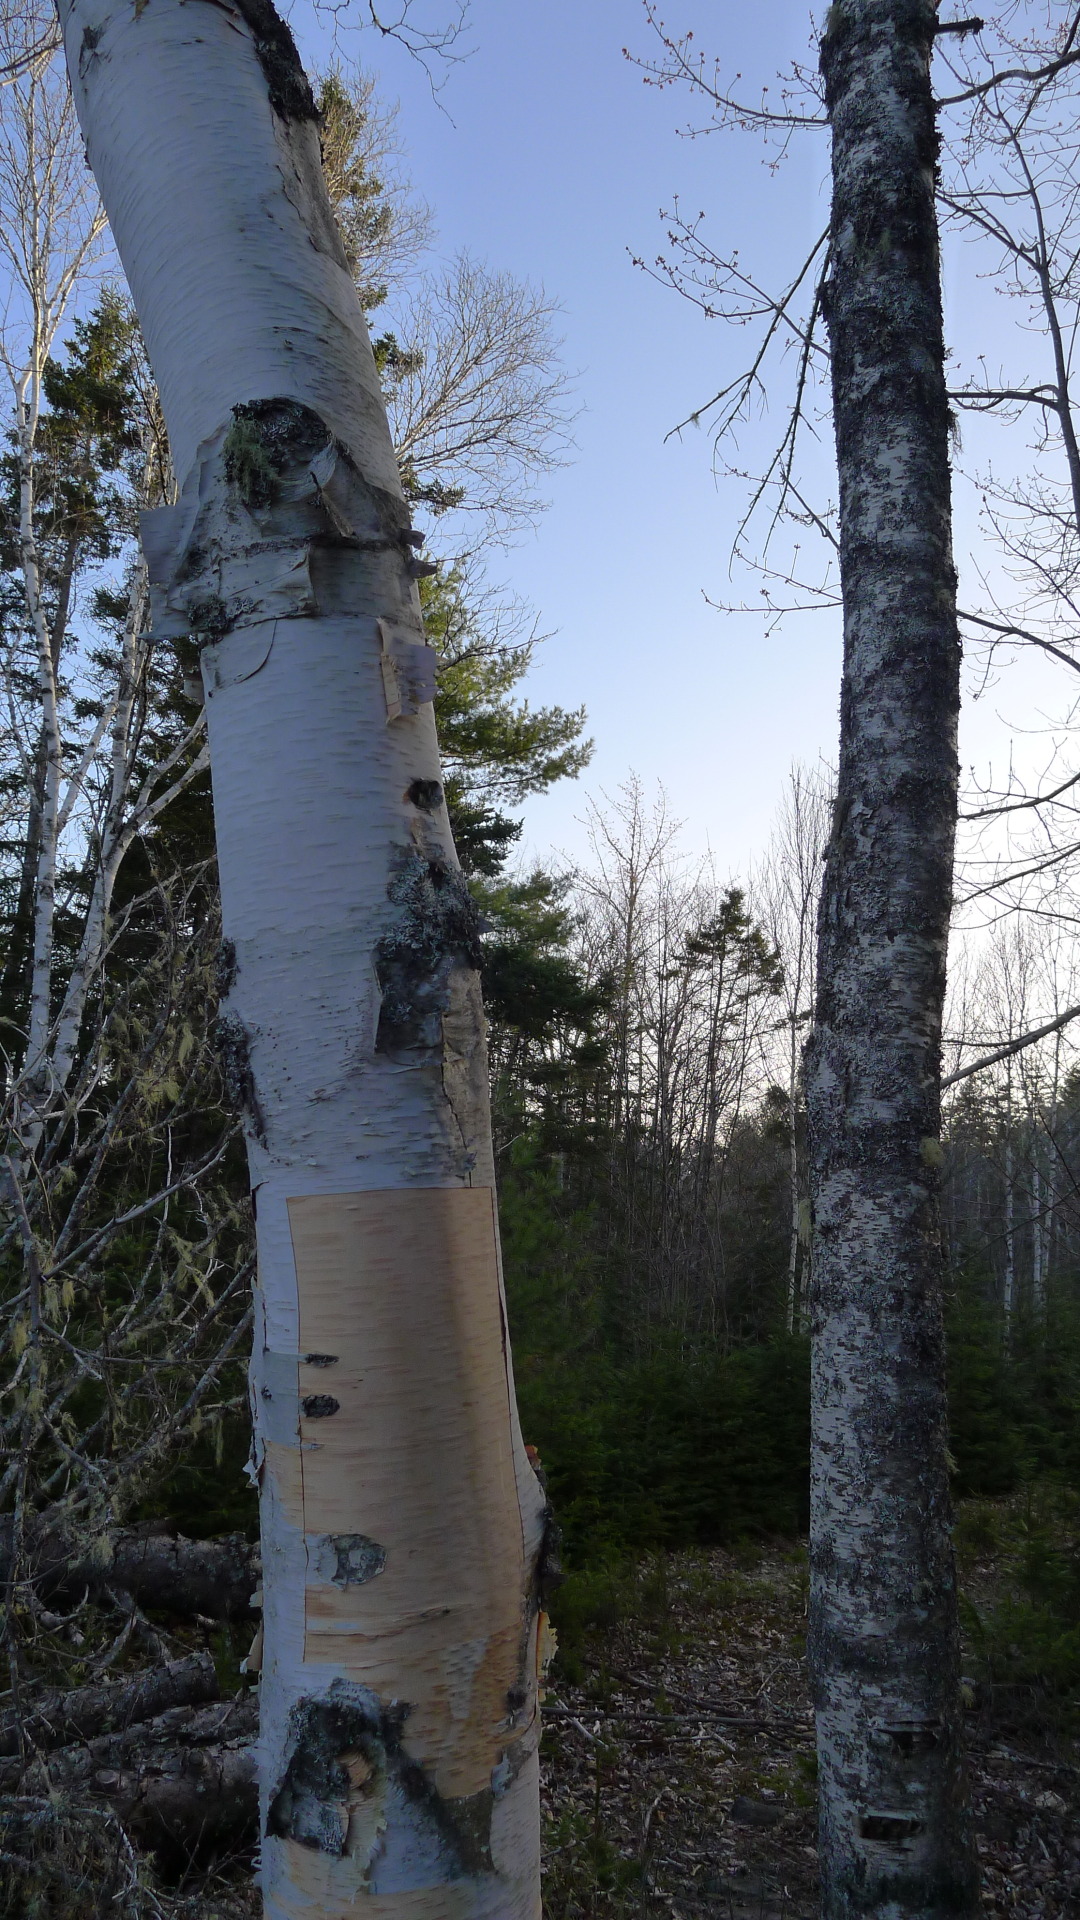 A very special thank you to the old birch trees outside Chester, Nova Scotia that provided some bark for the cassette cases. Sustainably harvested, and offerings were made in return.